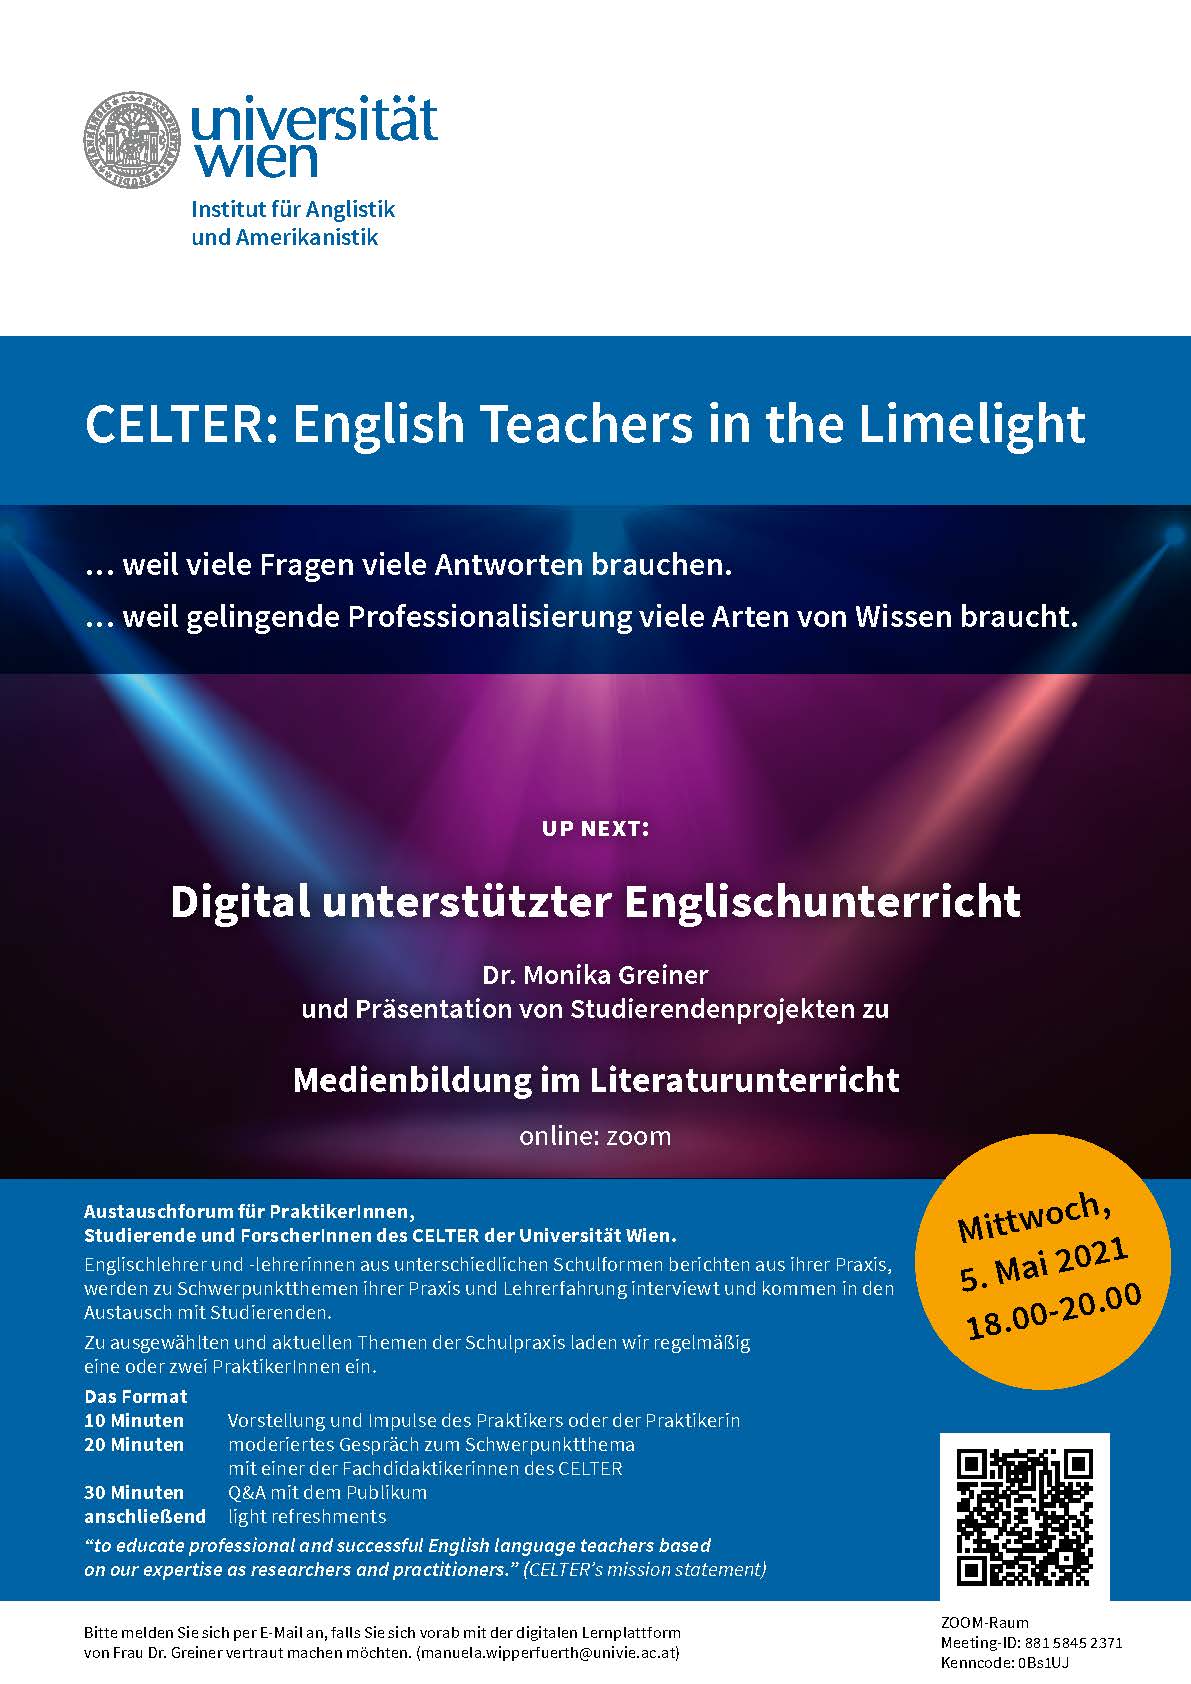 CELTER - English Teachers in the Limelight 